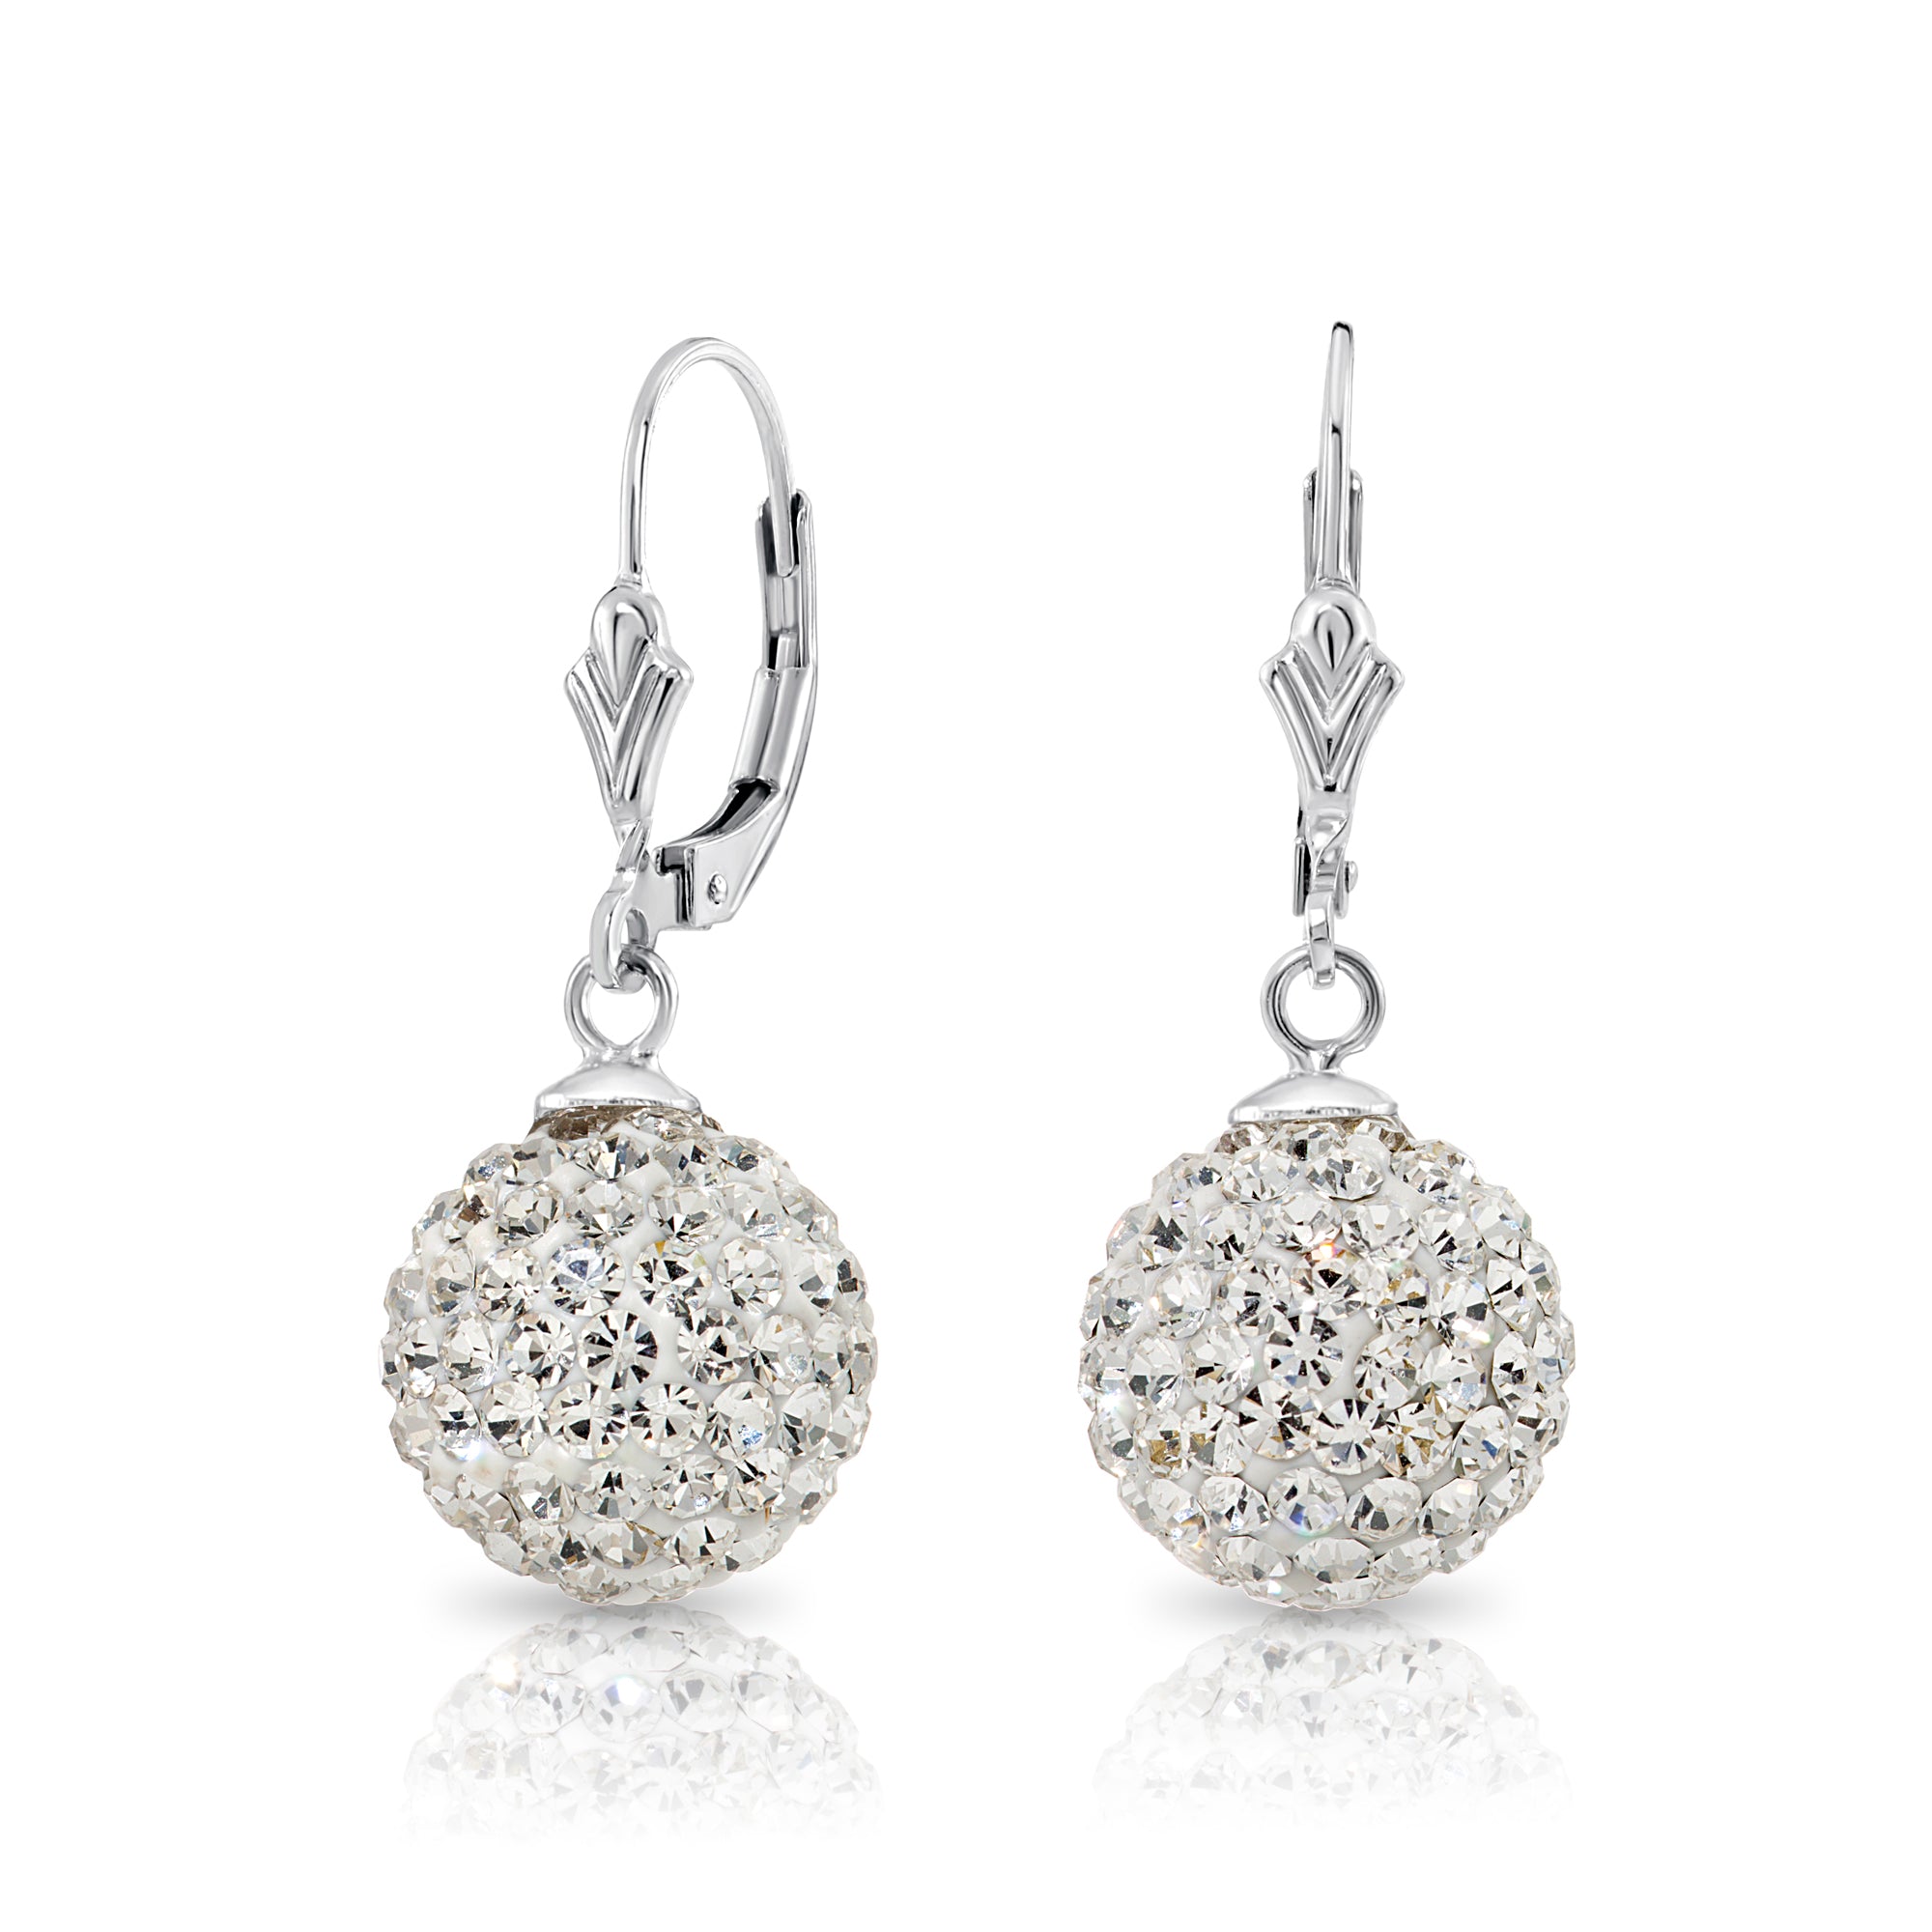 CZ Crystal Ball French-back Dangle Earrings in Sterling Silver